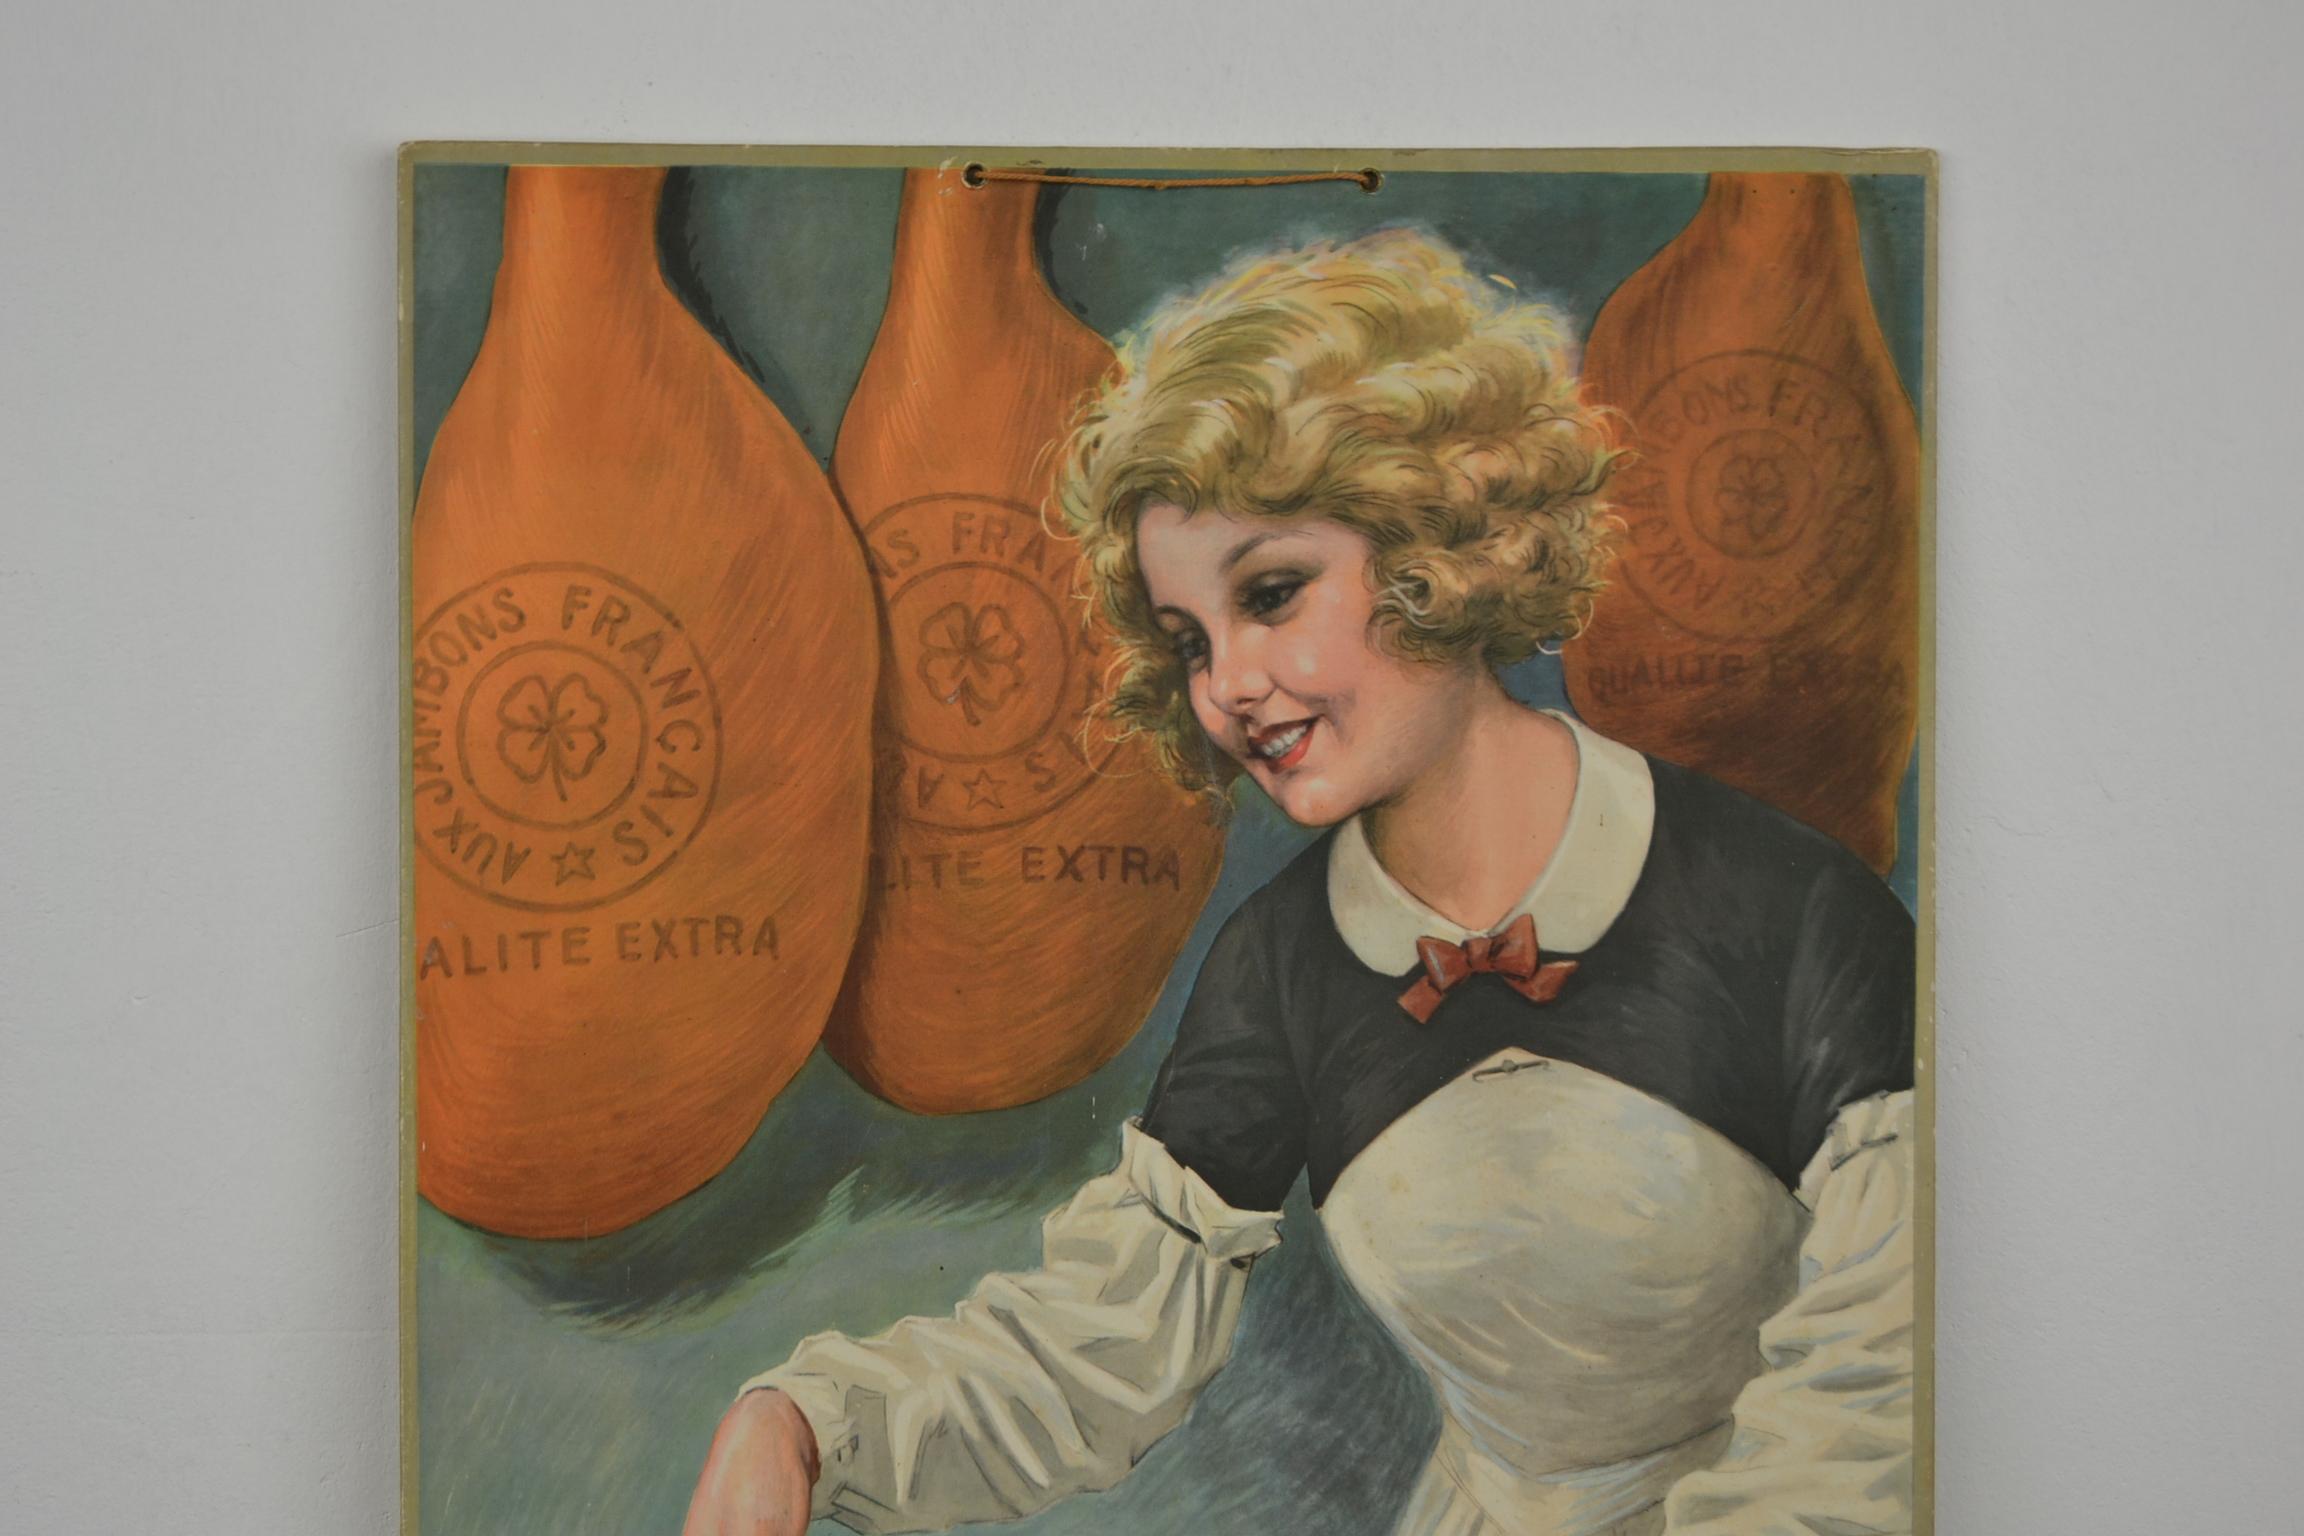 Antique lithographic advertising sign for French Ham designed by Millière Maurice.
This Art Deco sign dates from the 1930s.
A butchers wife, beautiful lady with red lipstick, cutting the ham into slices with a large butcher knife.
Behind, the